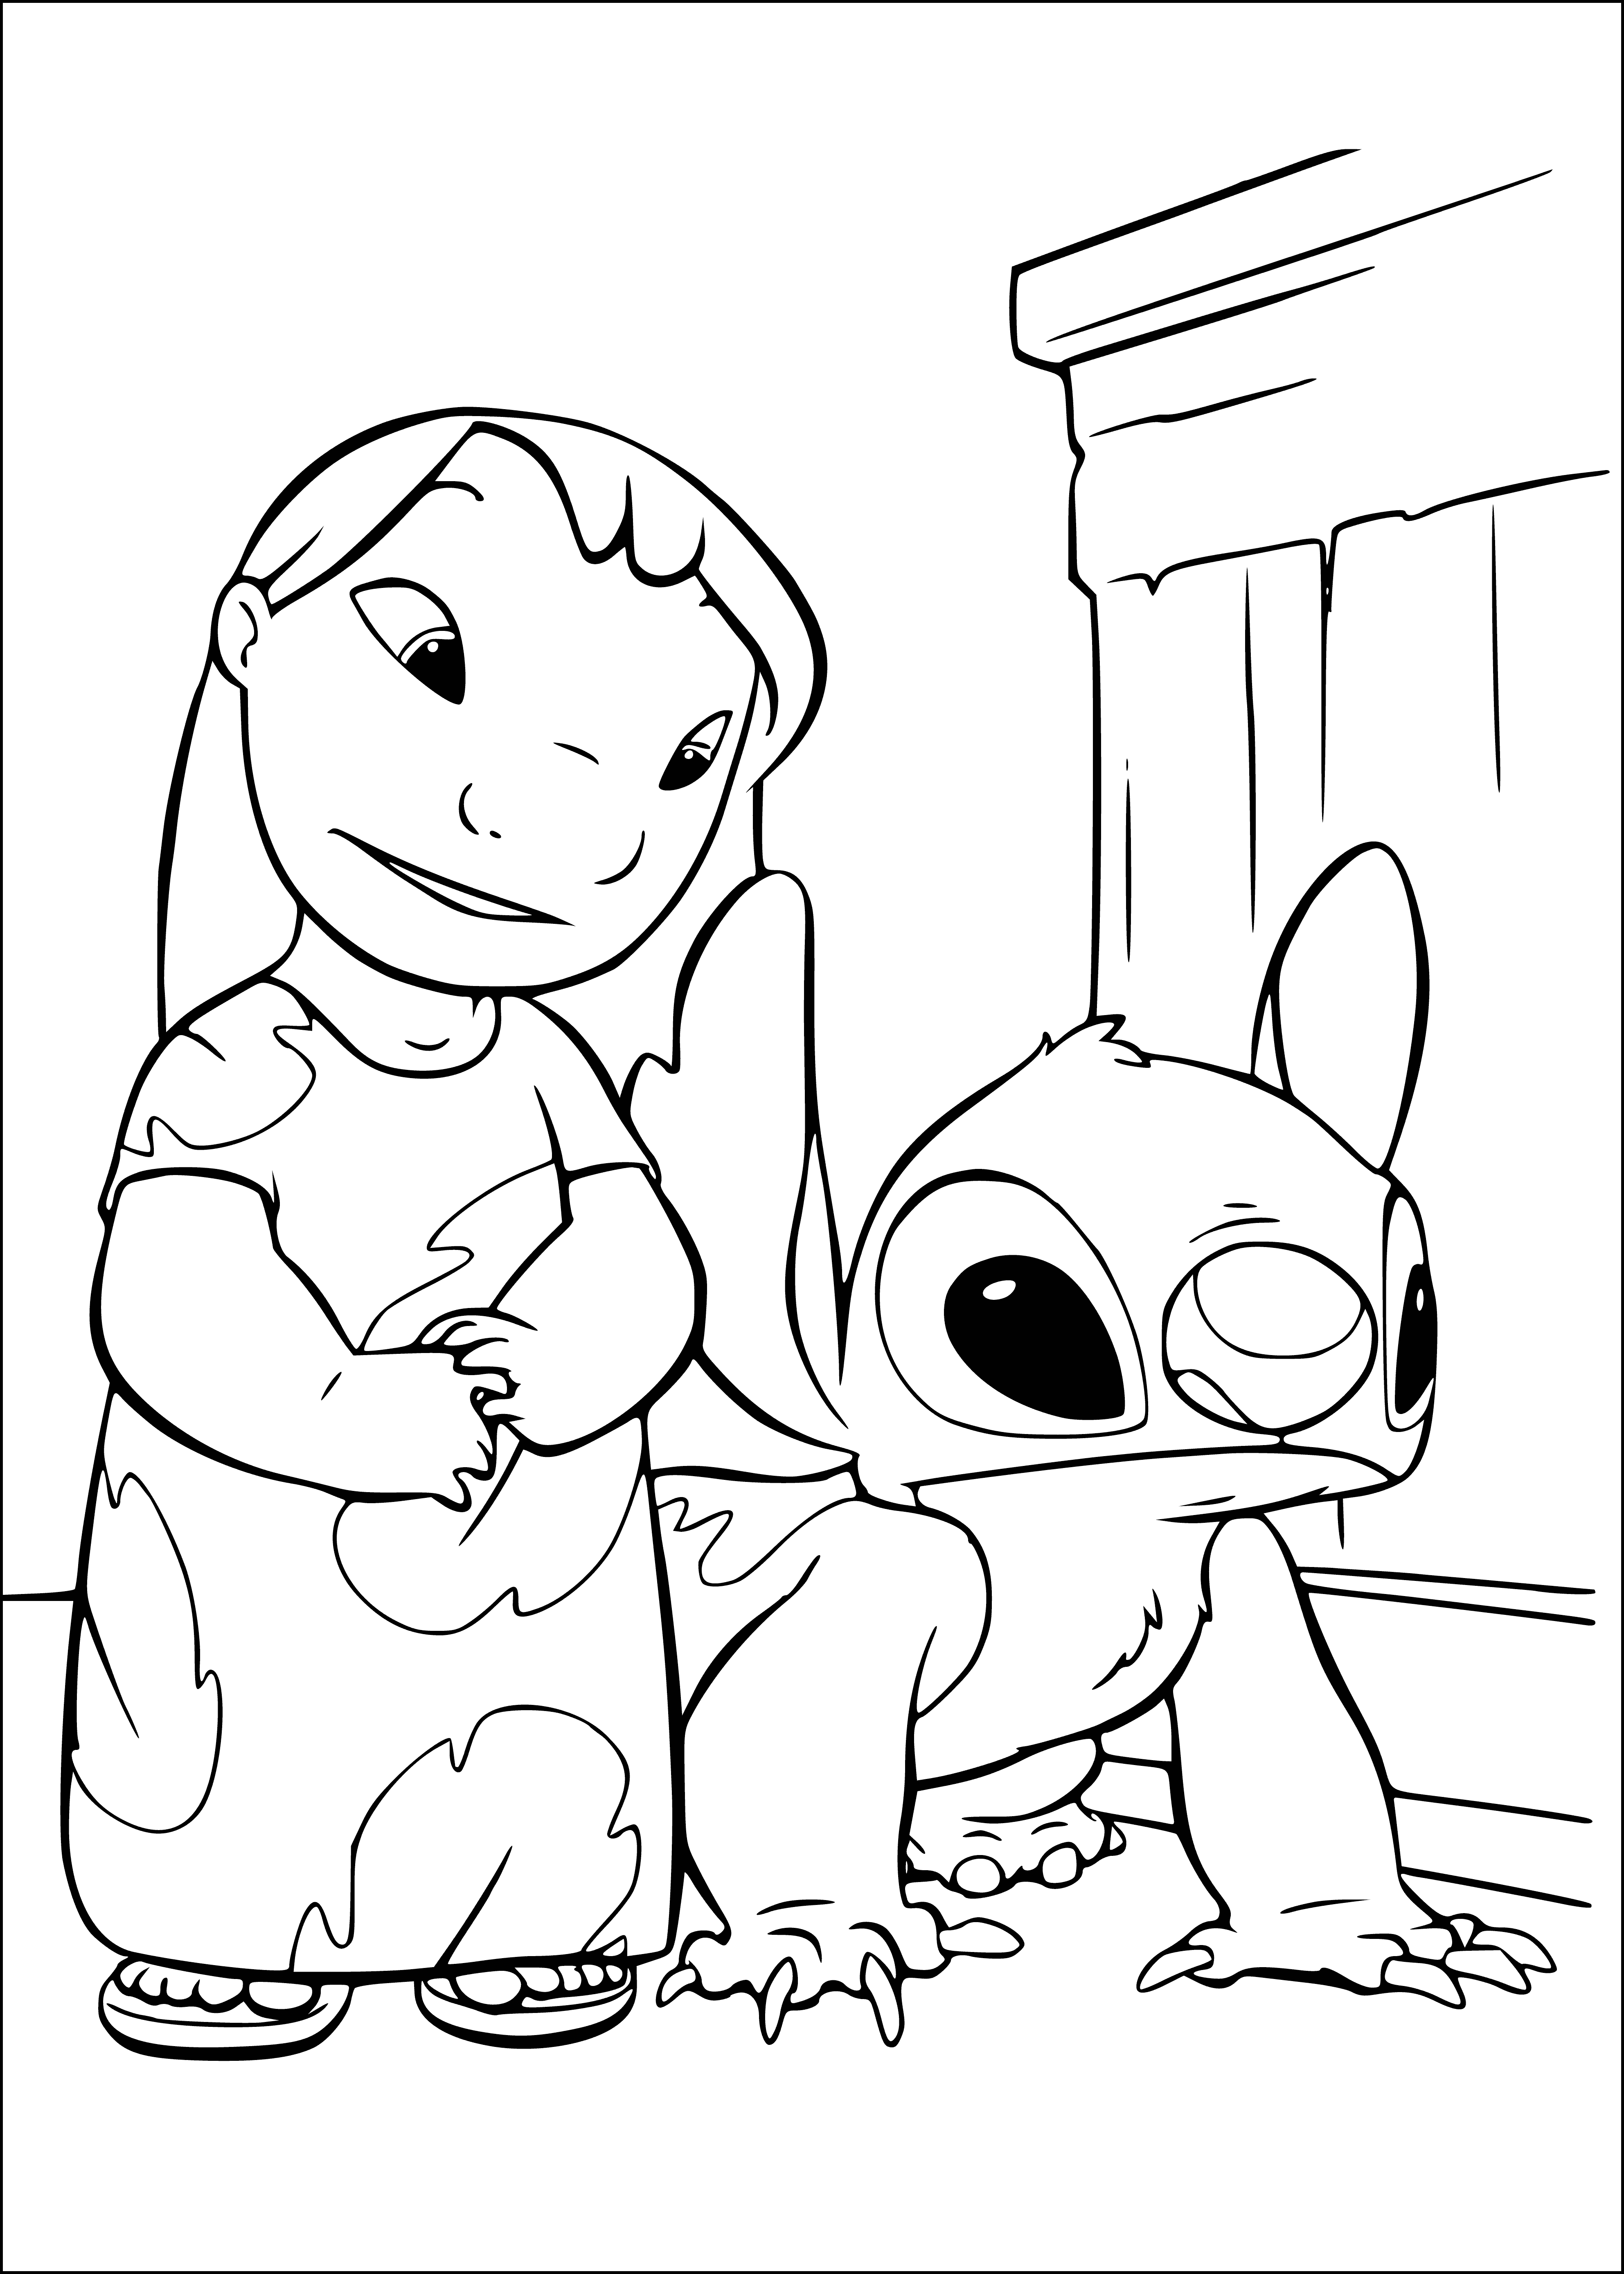 coloring page: Brown & white Stitch has black eyes & nose, wearing a red collar.